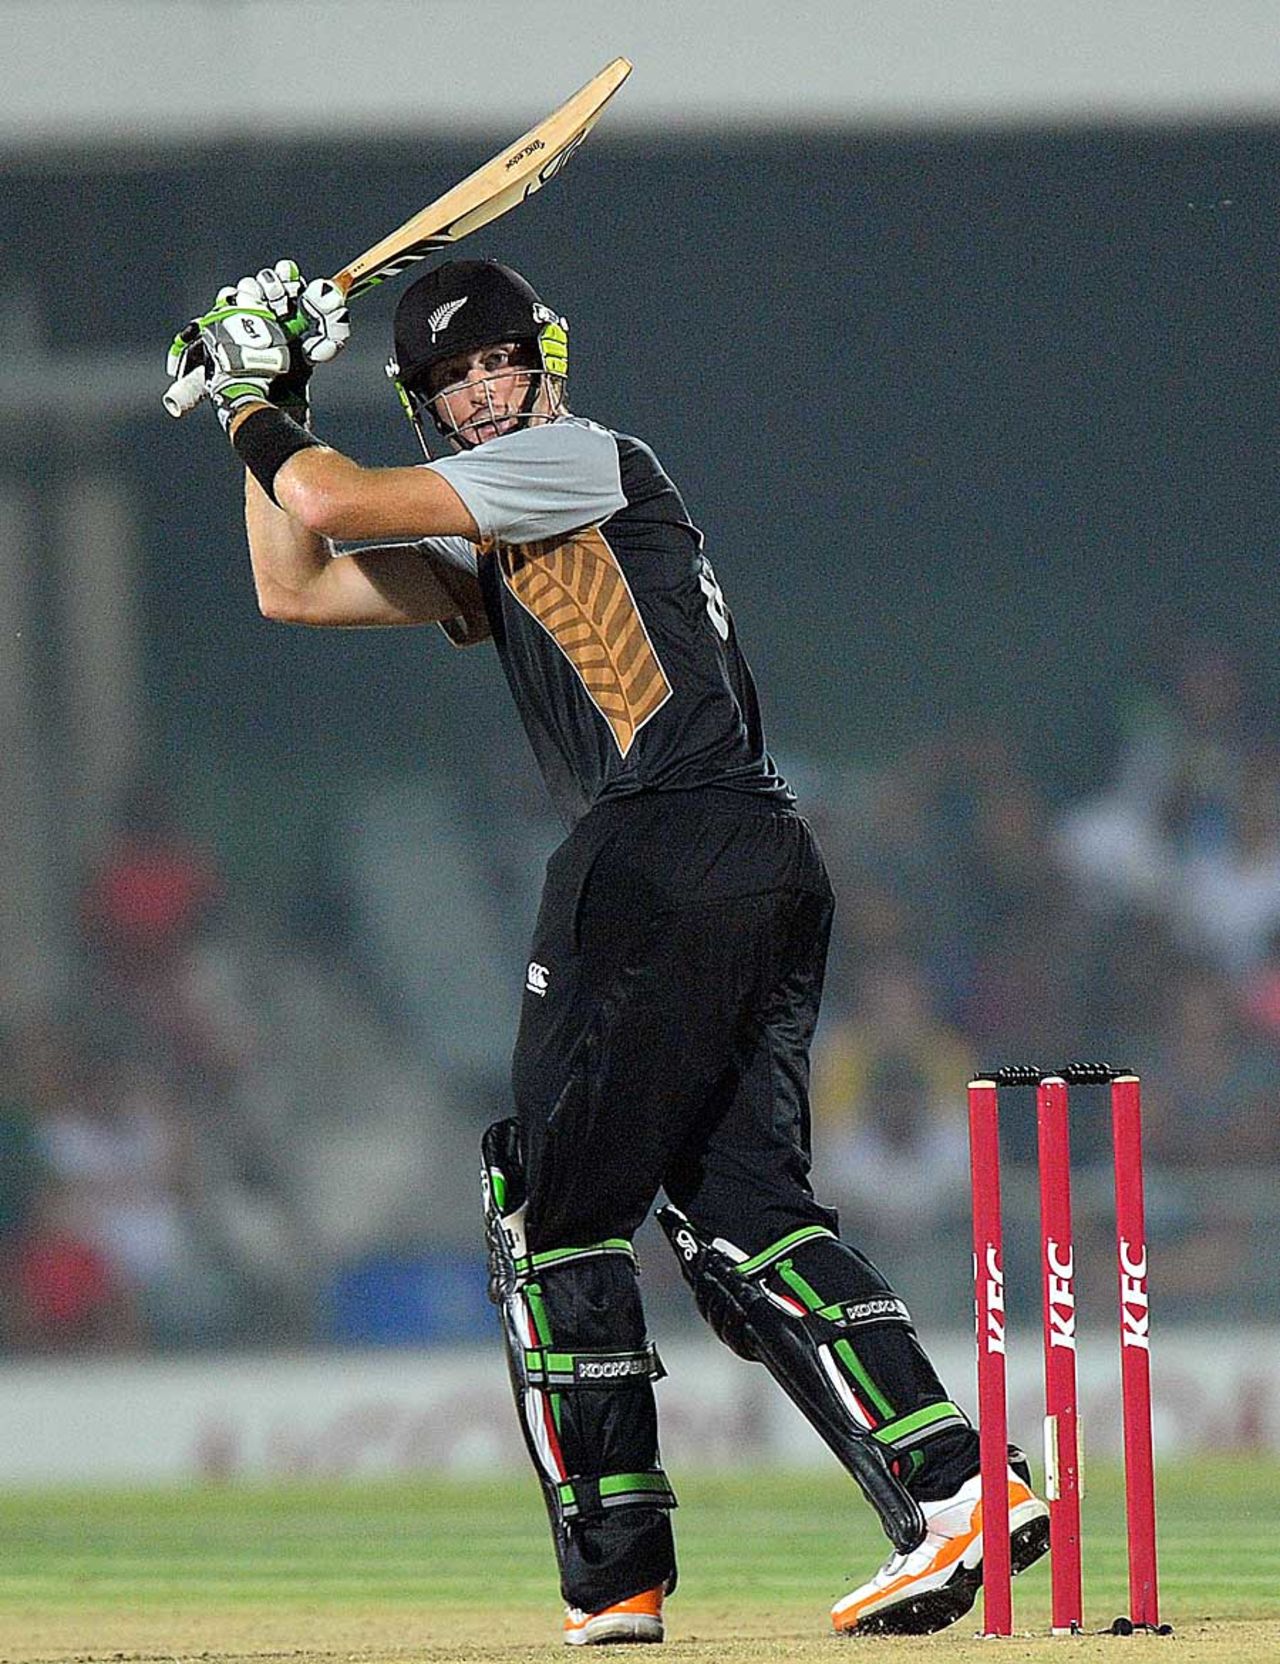 Martin Guptill whips one behind square, South Africa v New Zealand, 2nd T20, East London, December 23, 2012